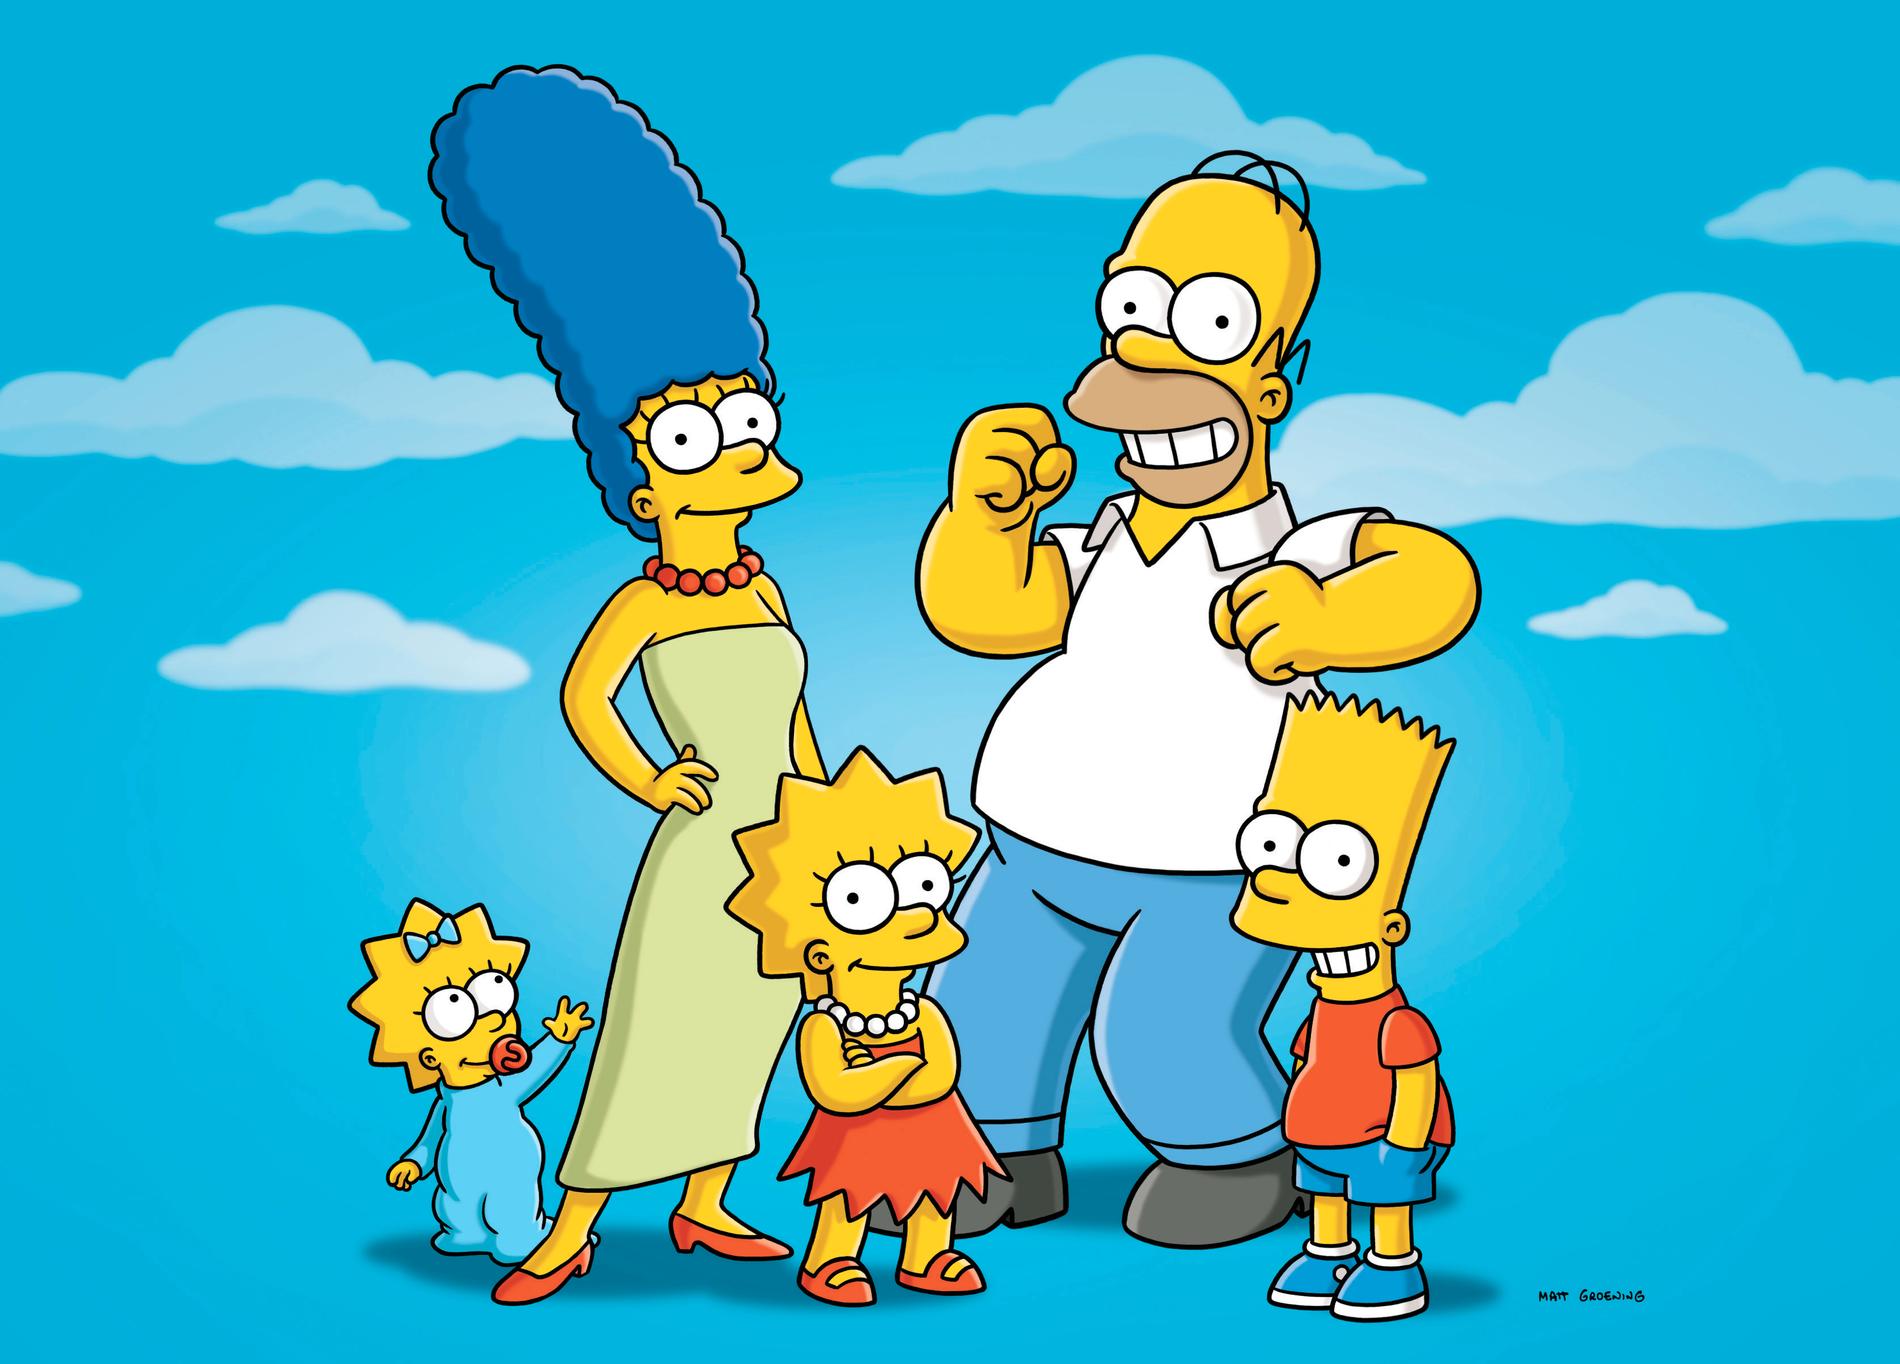 ”The Simpsons”.